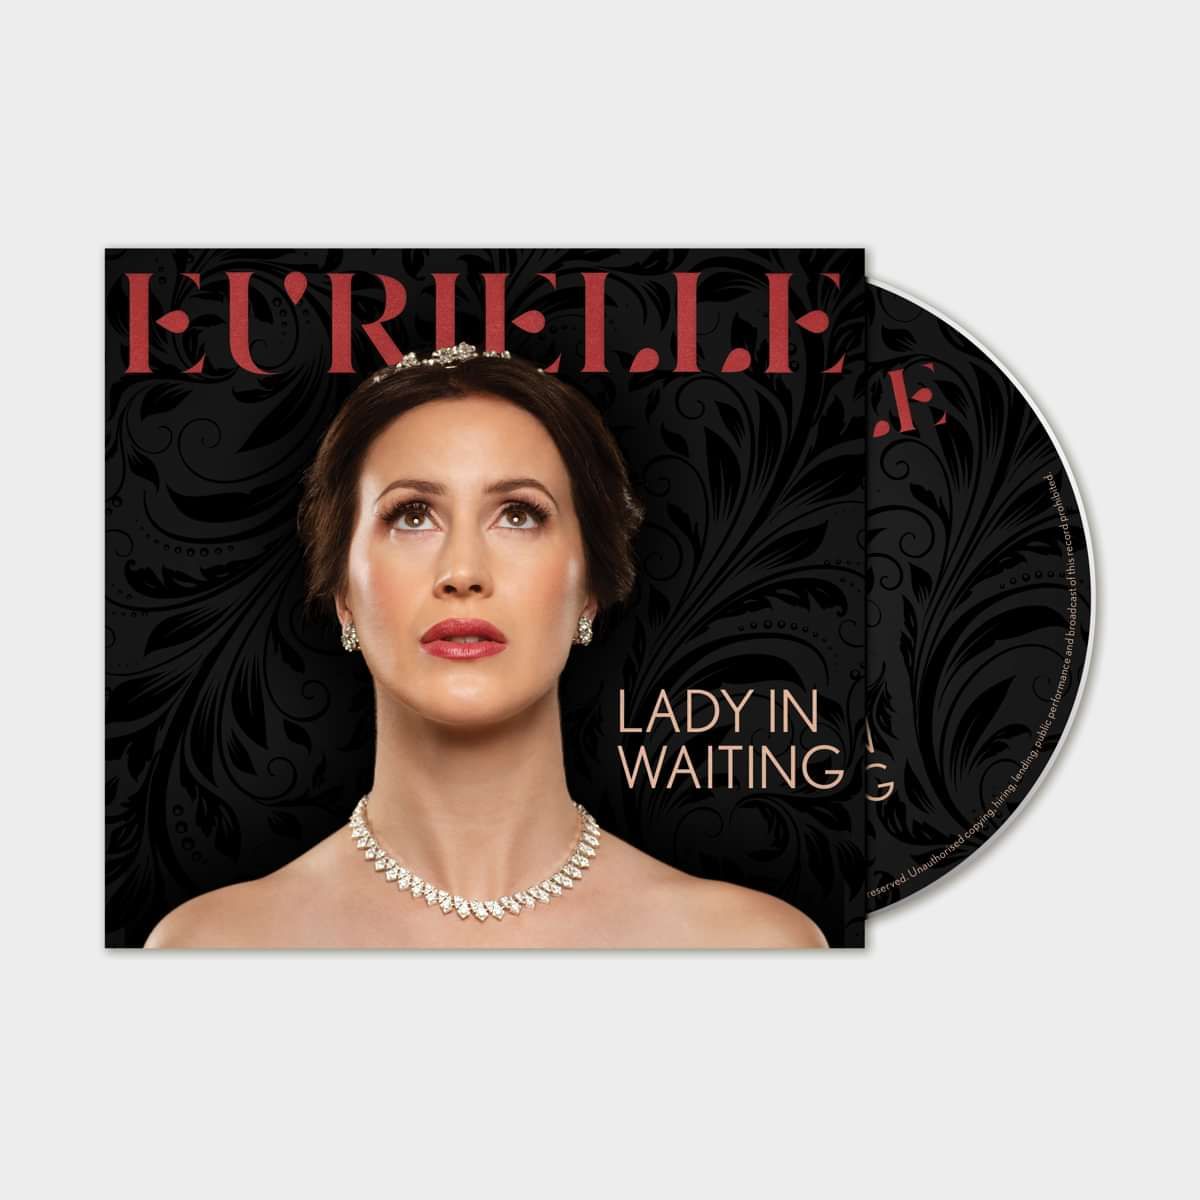 LADY IN WAITING (ALBUM CD - UNSIGNED) - Eurielle